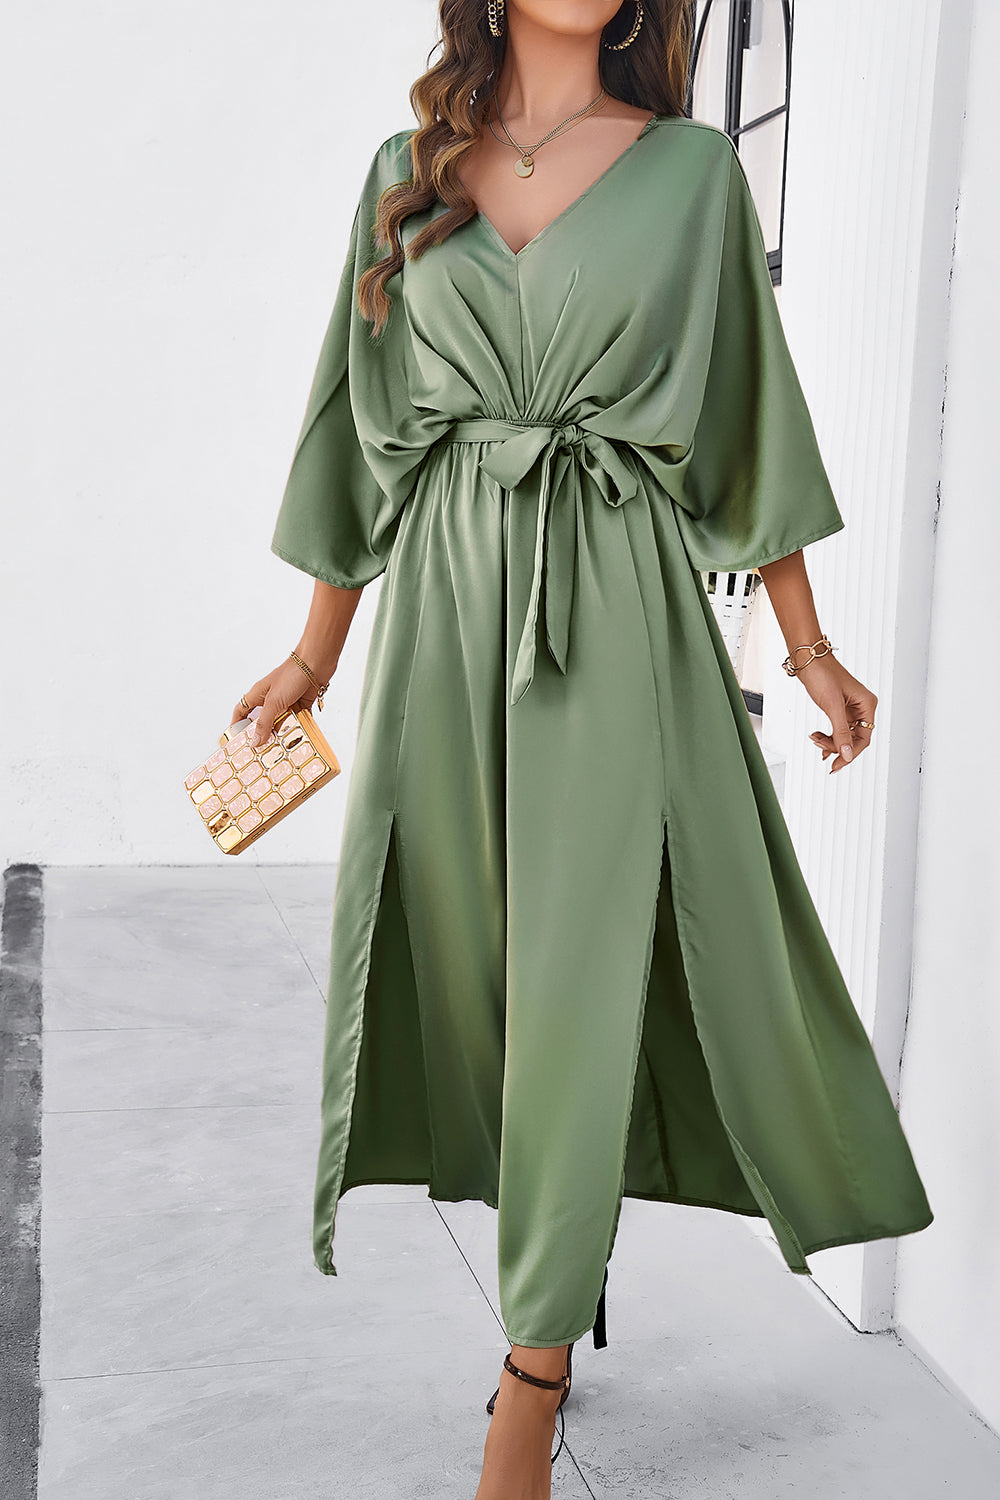 Elegant Summer Beach Wedding Guest Dress for Women Over 50: Slit Tied V-Neck with Three-Quarter Sleeves Party Dress